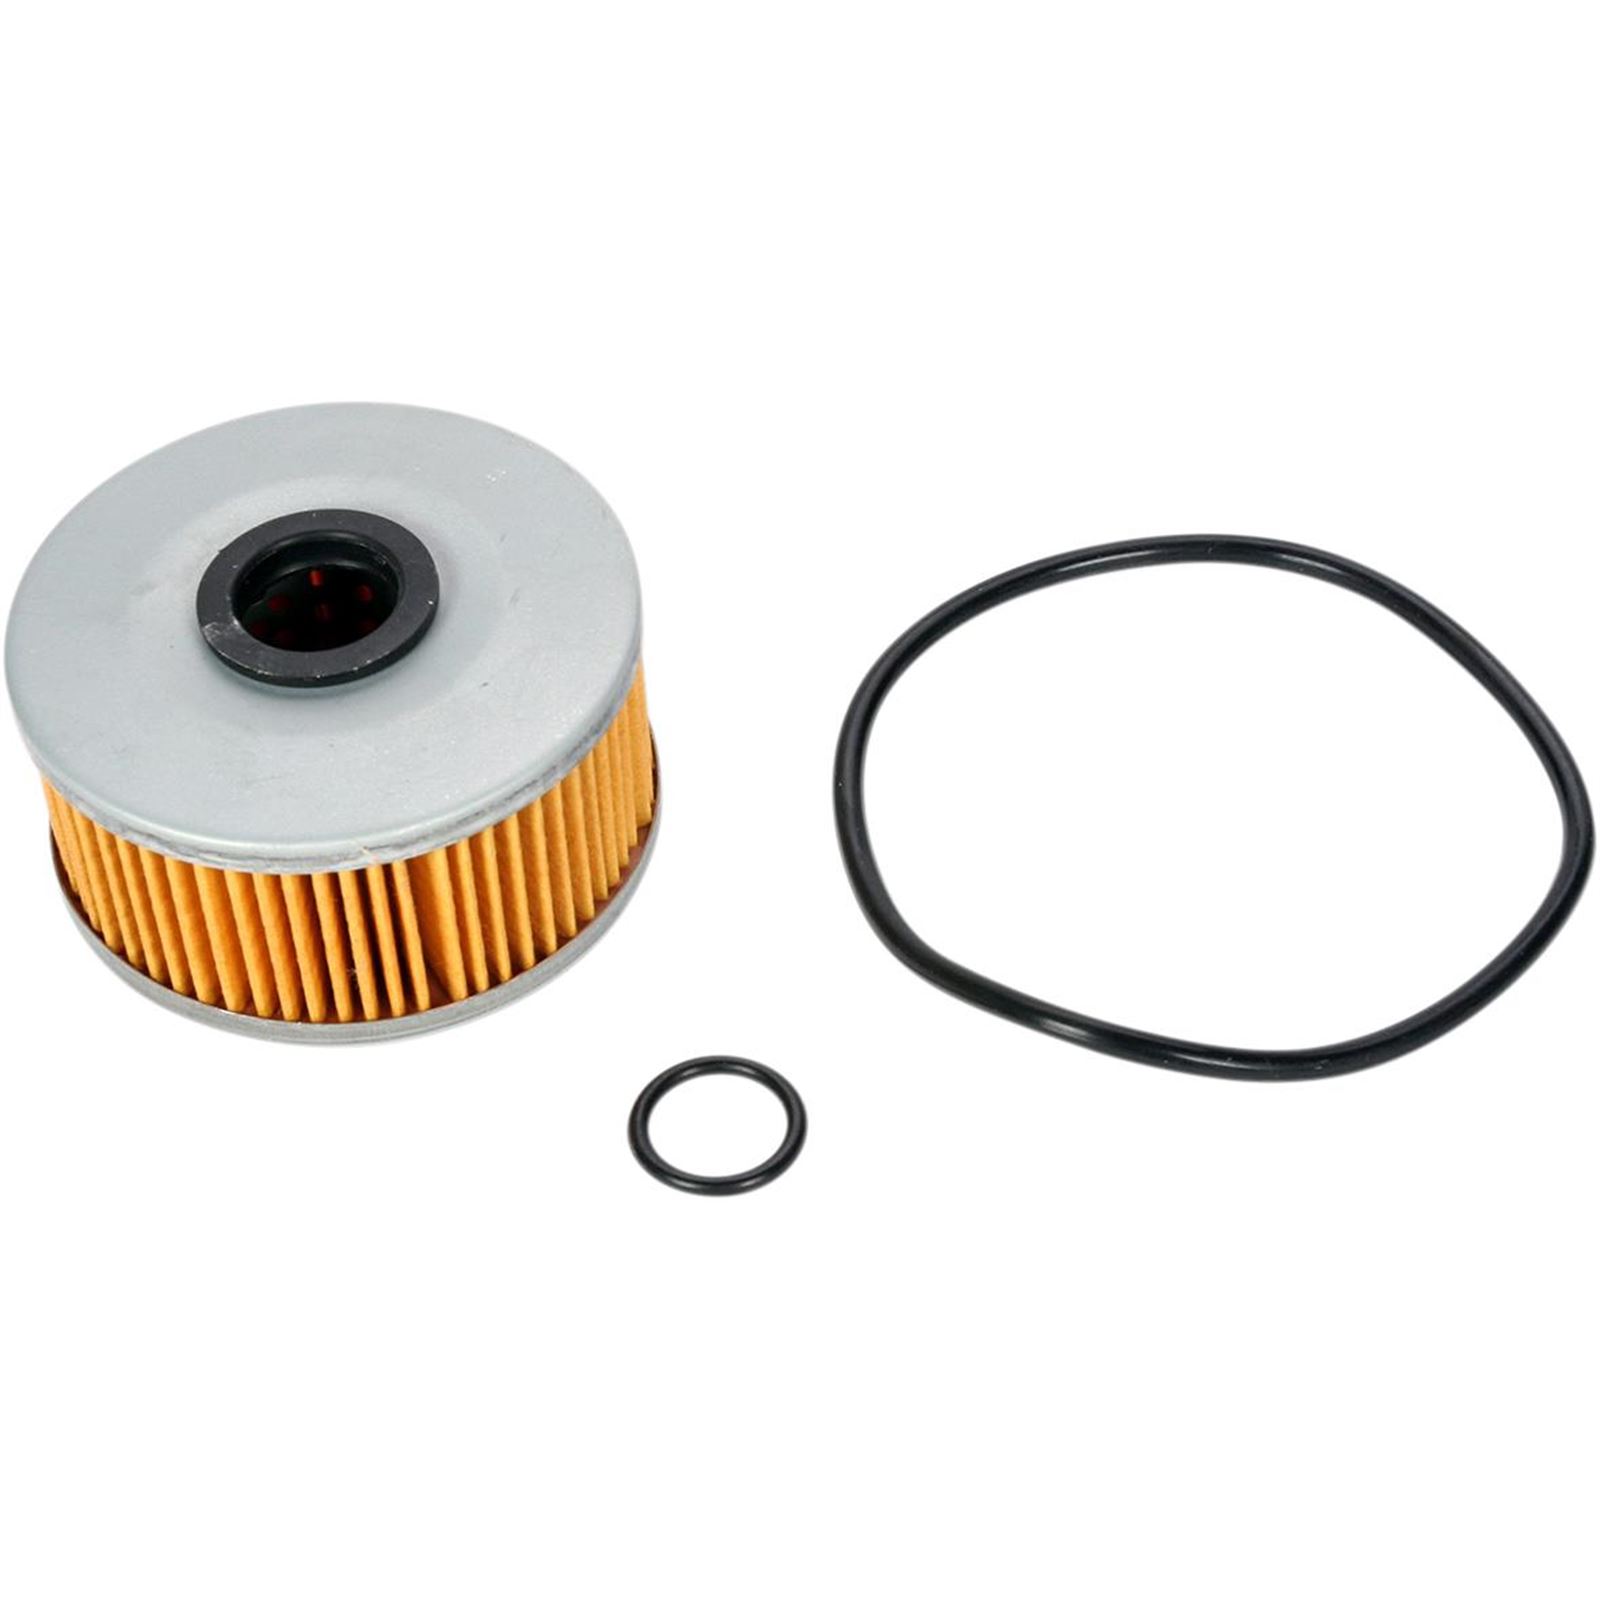 Parts Unlimited Oil Filter for Yamaha